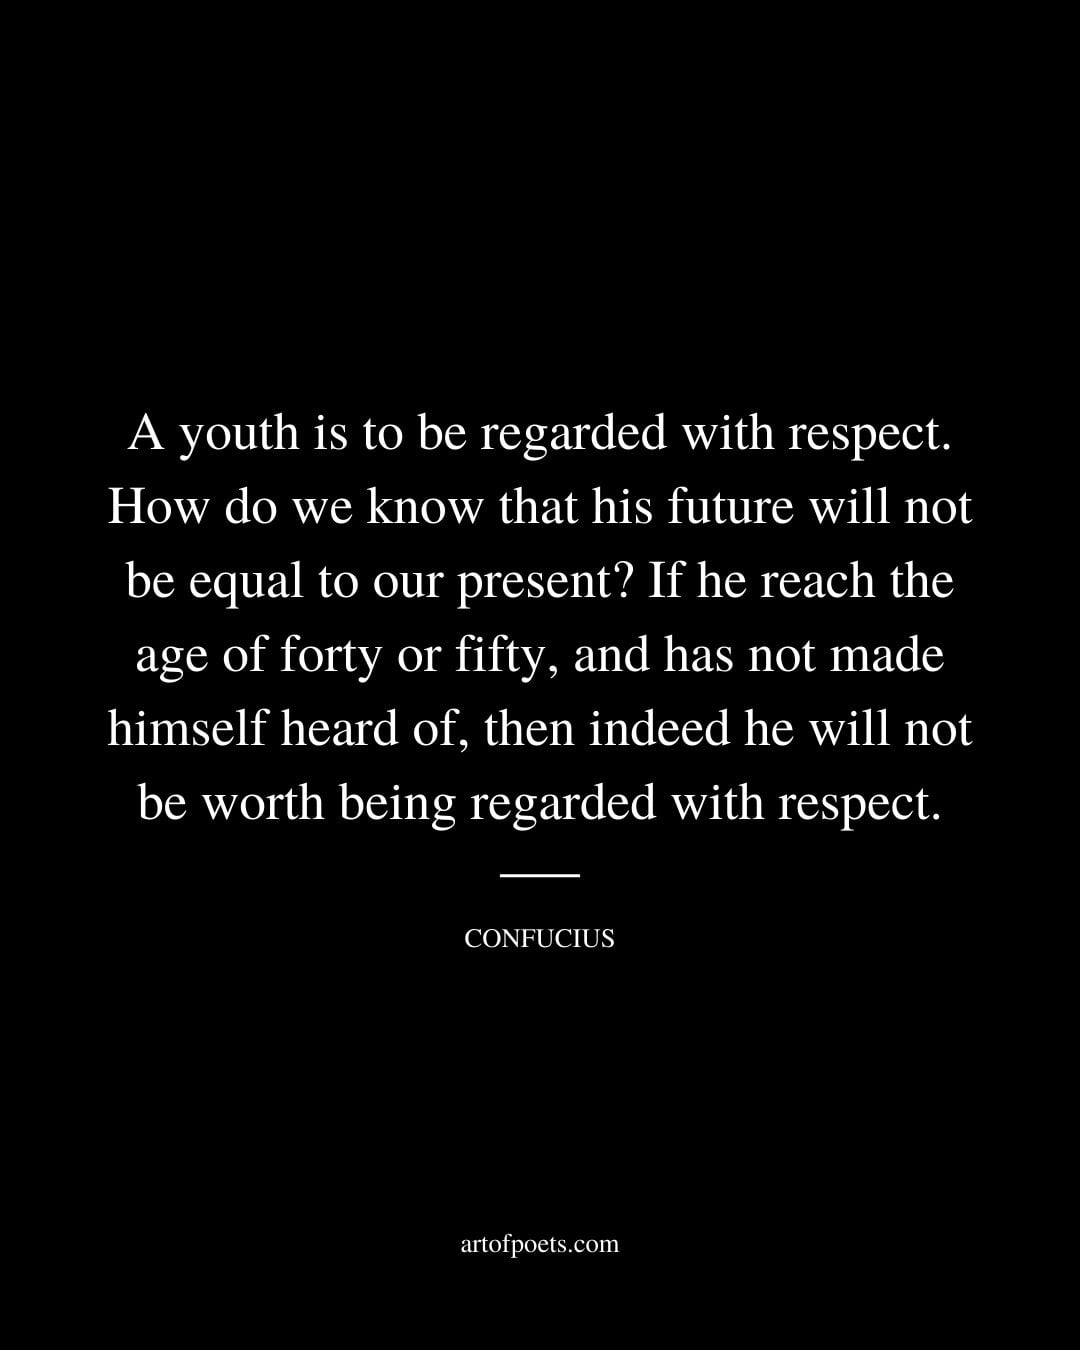 A youth is to be regarded with respect. How do we know that his future will not be equal to our present